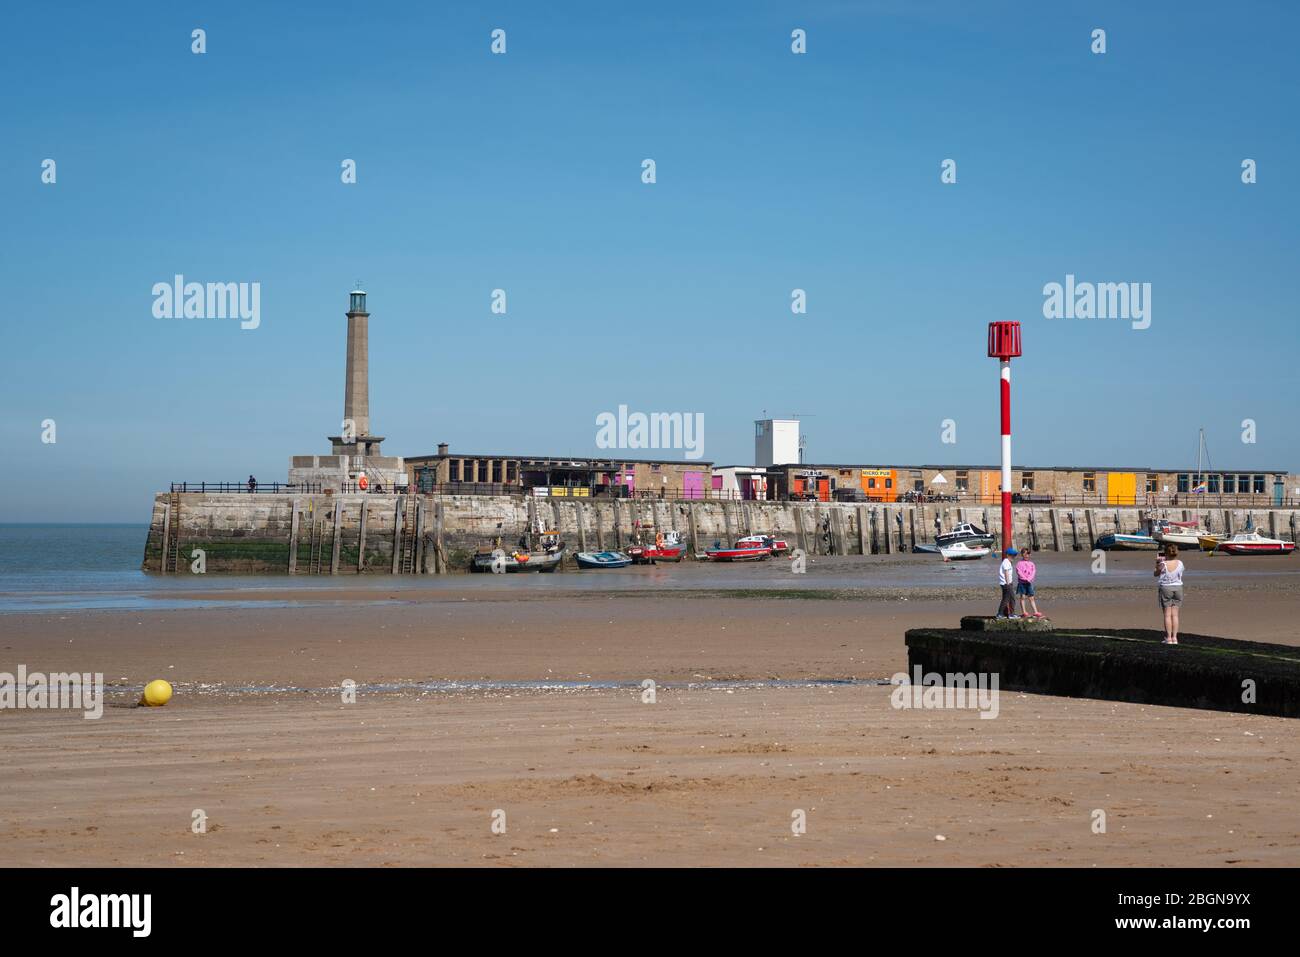 Margate main sands during the Covid-19 global pandemic lockdown, April 2020 Stock Photo